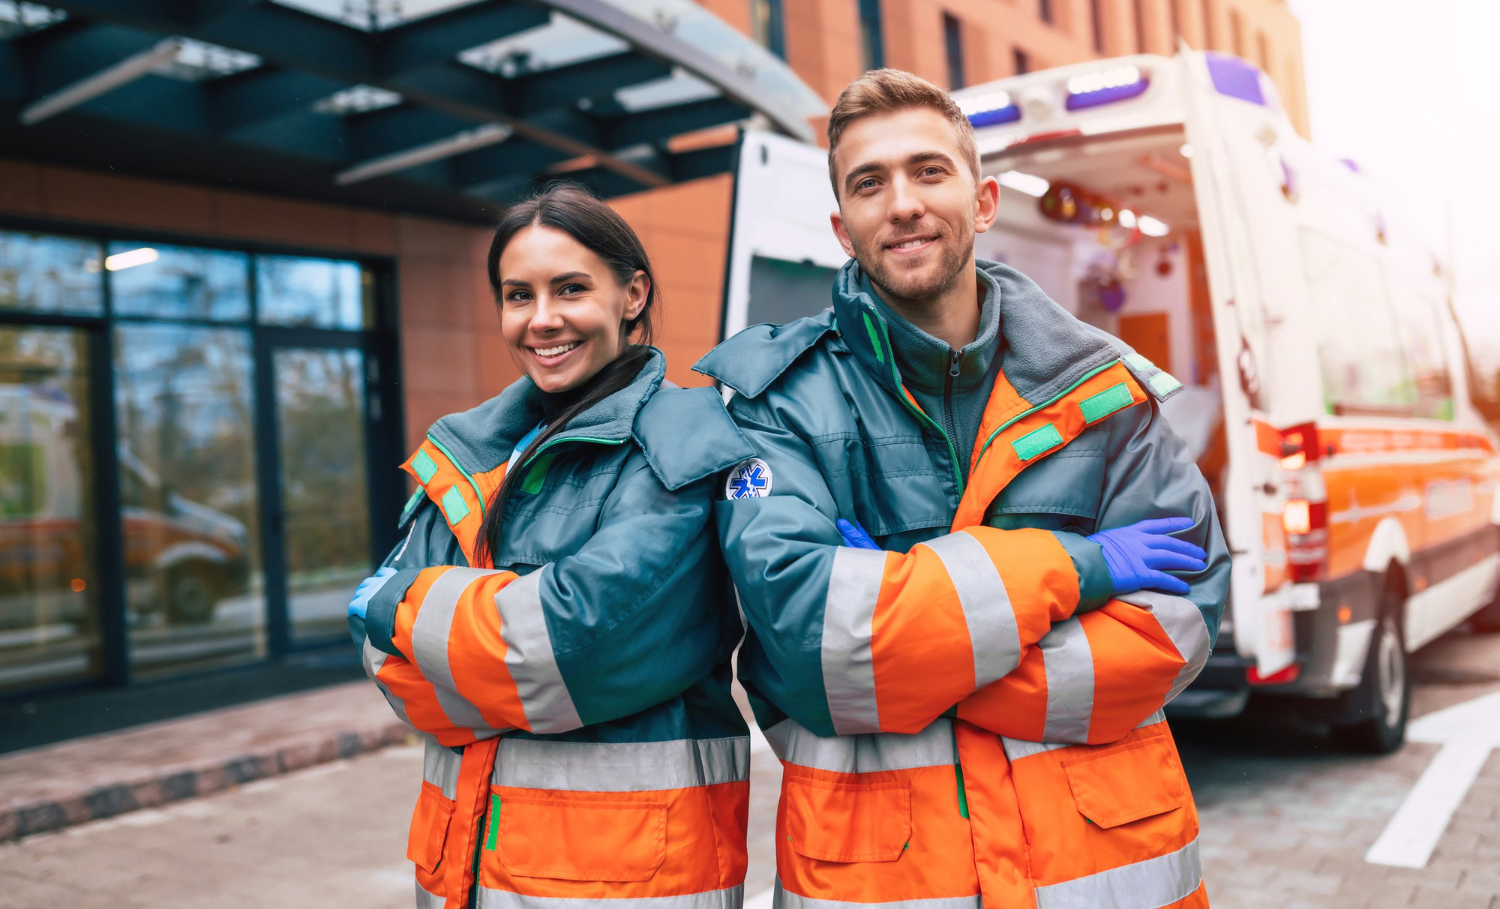 Two paramedics stand in front of an open ambulance bay outside of the hospital. The male and female EMS professionals pose at the camera with their arms crossed, smiling, wearing orange and blue high-visibility jackets.